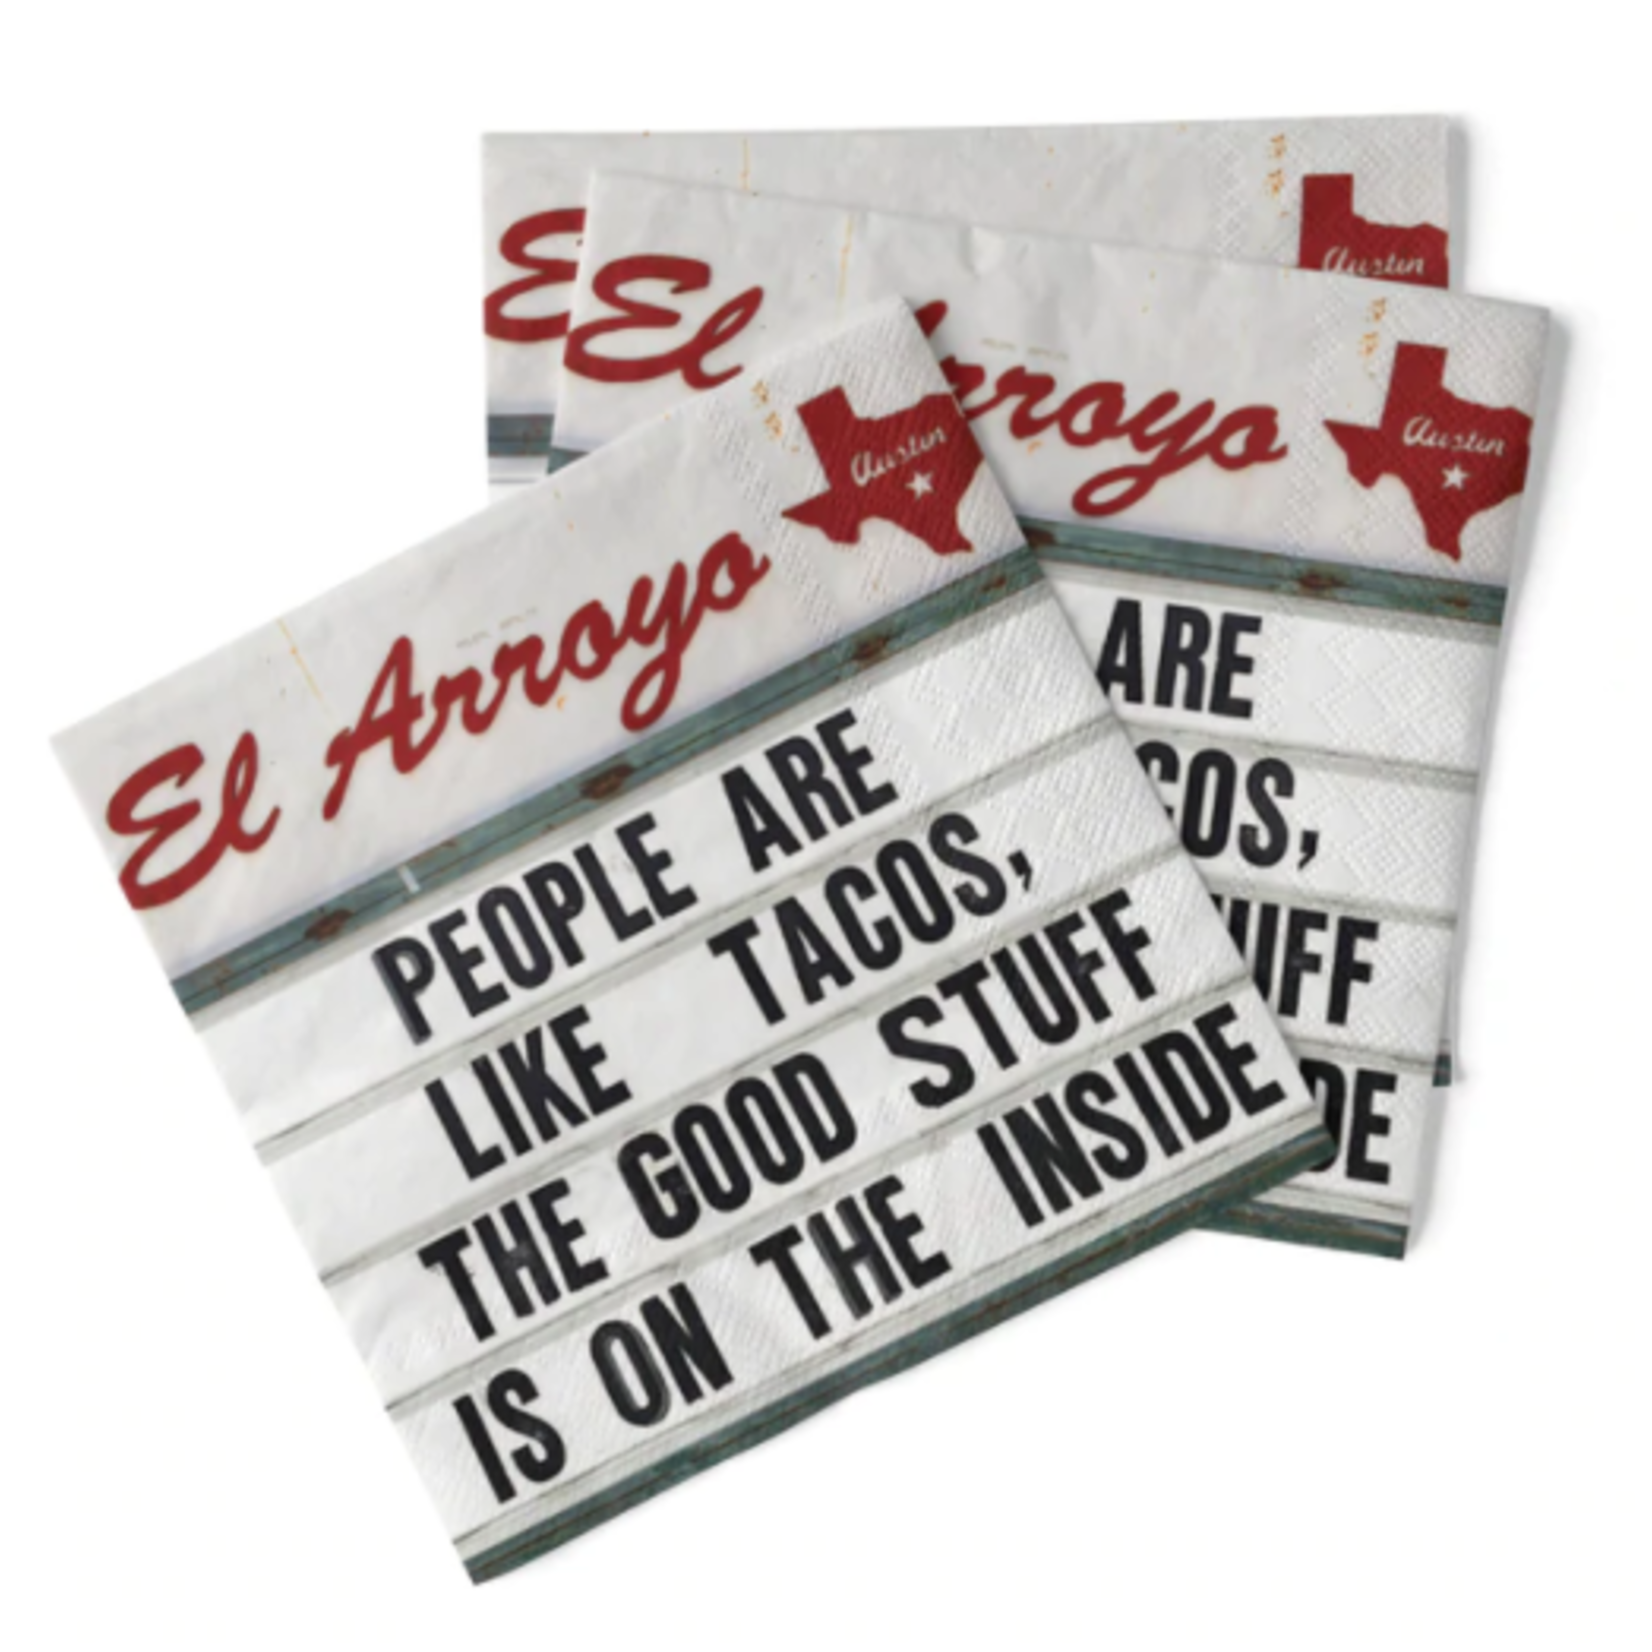 El Arroyo Cocktail Napkins (Pack of 20) - People Are Tacos